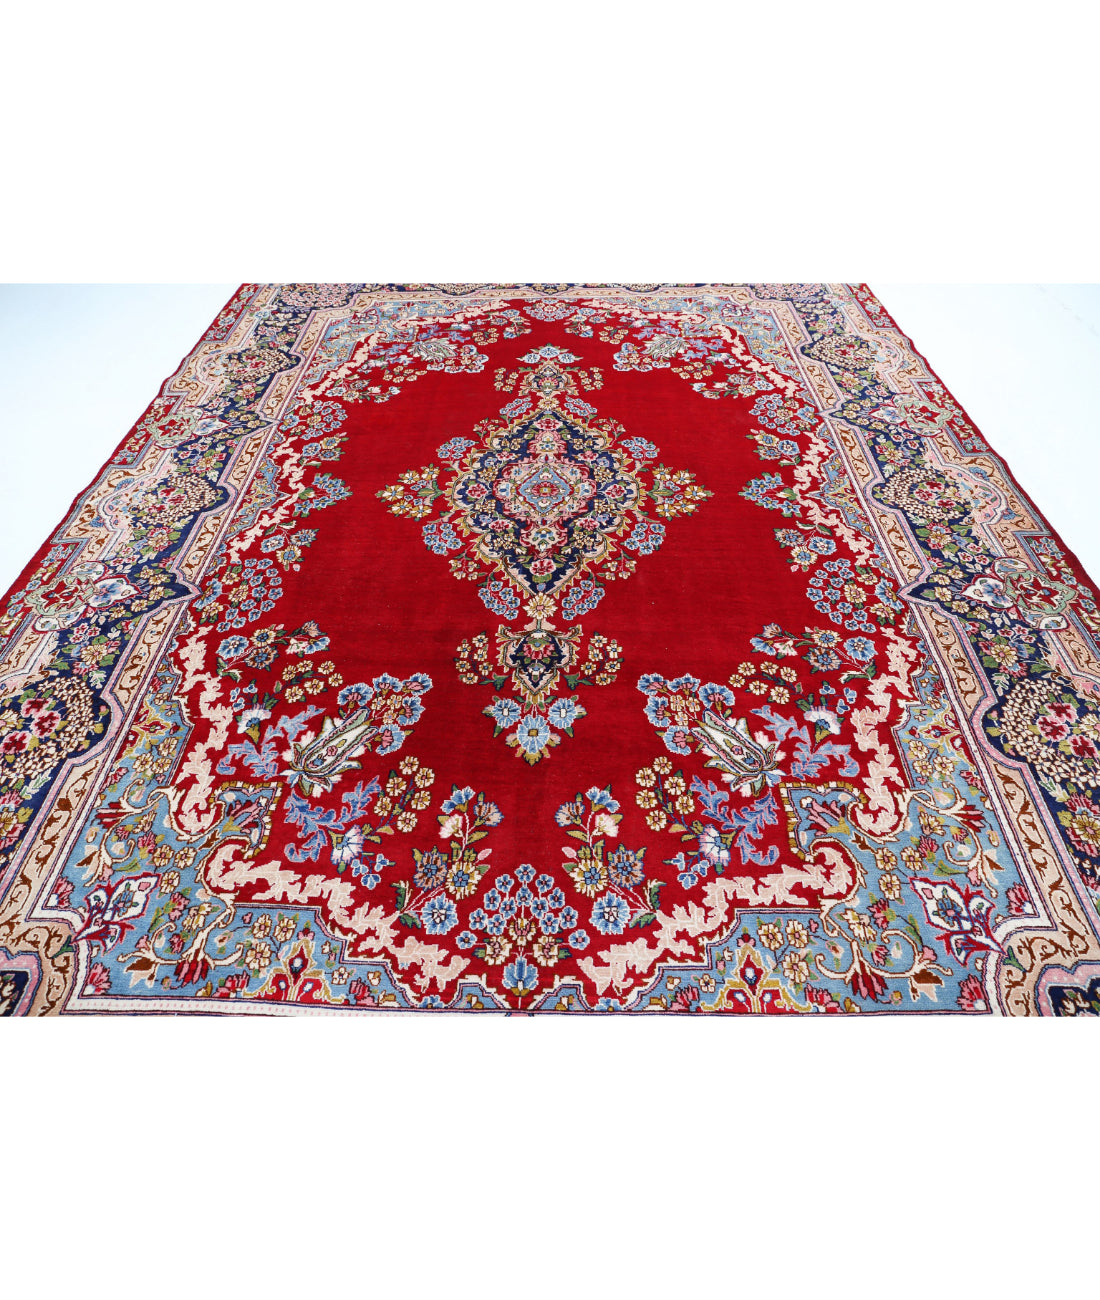 Hand Knotted Persian Kerman Wool Rug - 9'6'' x 13'2'' 9'6'' x 13'2'' (285 X 395) / Red / Blue